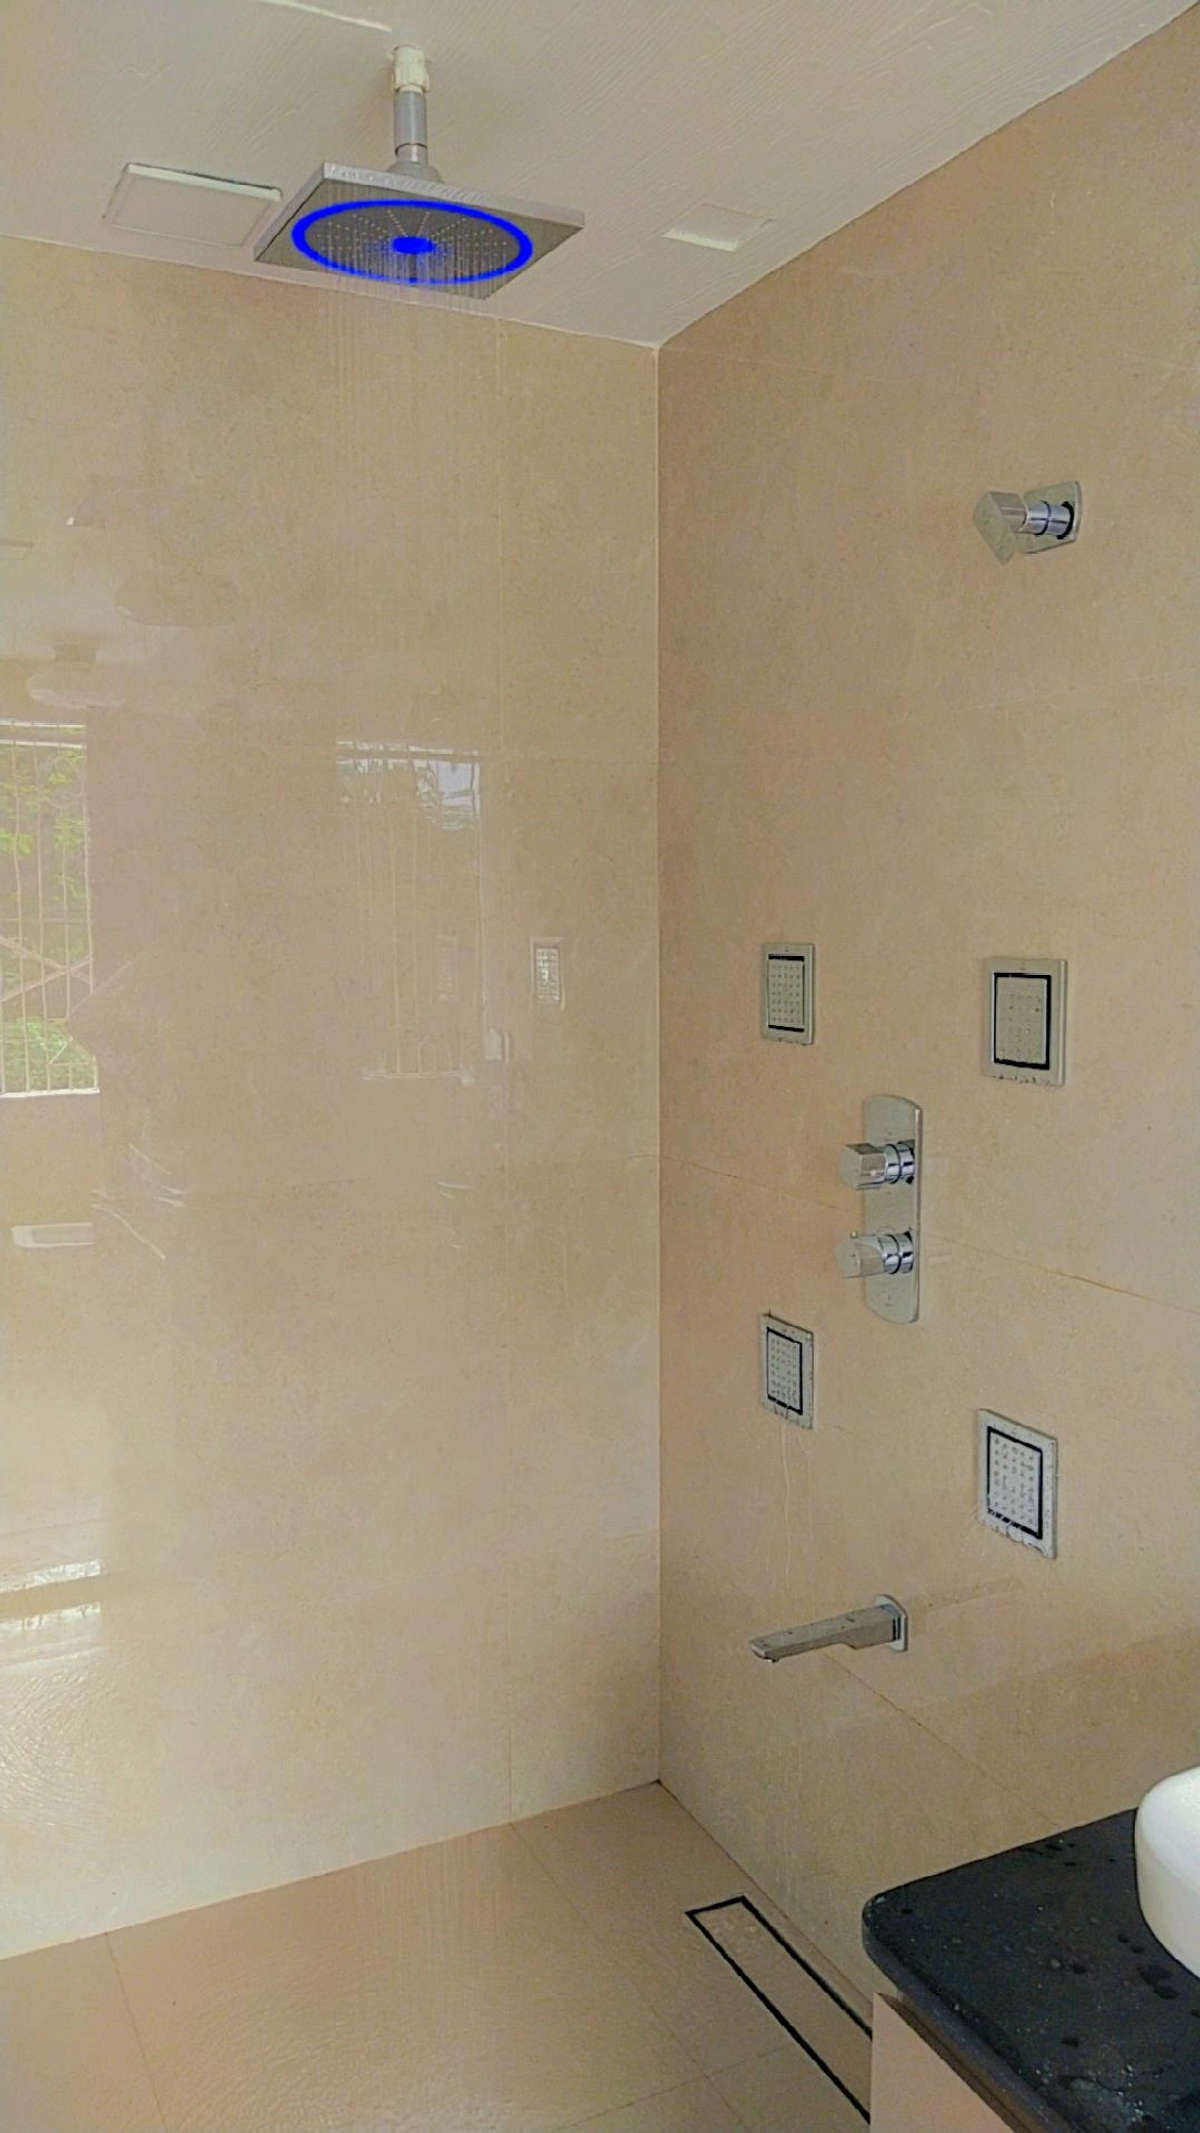 if u need plumber for luxurious bathroom heavy accessories like a body jet shower panel of jaquar kohler delta any kind dan contact me 8209745046 will work in a gujarat maharashtra pattern 